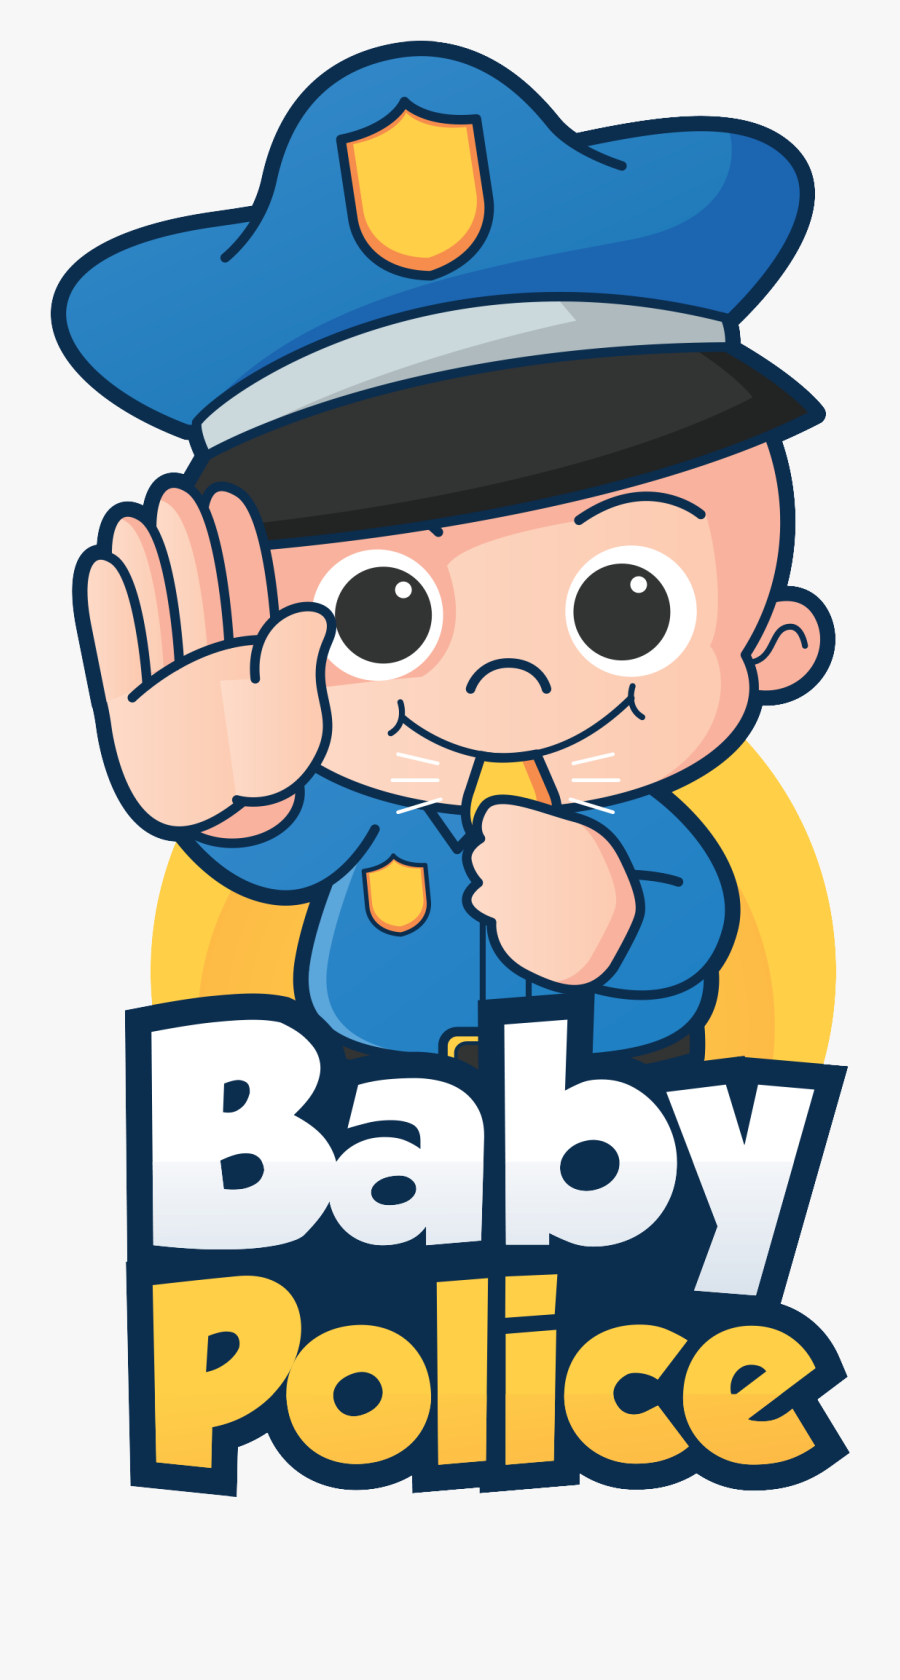 Police Clipart Baby - Baby Police Clip Art, Transparent Clipart